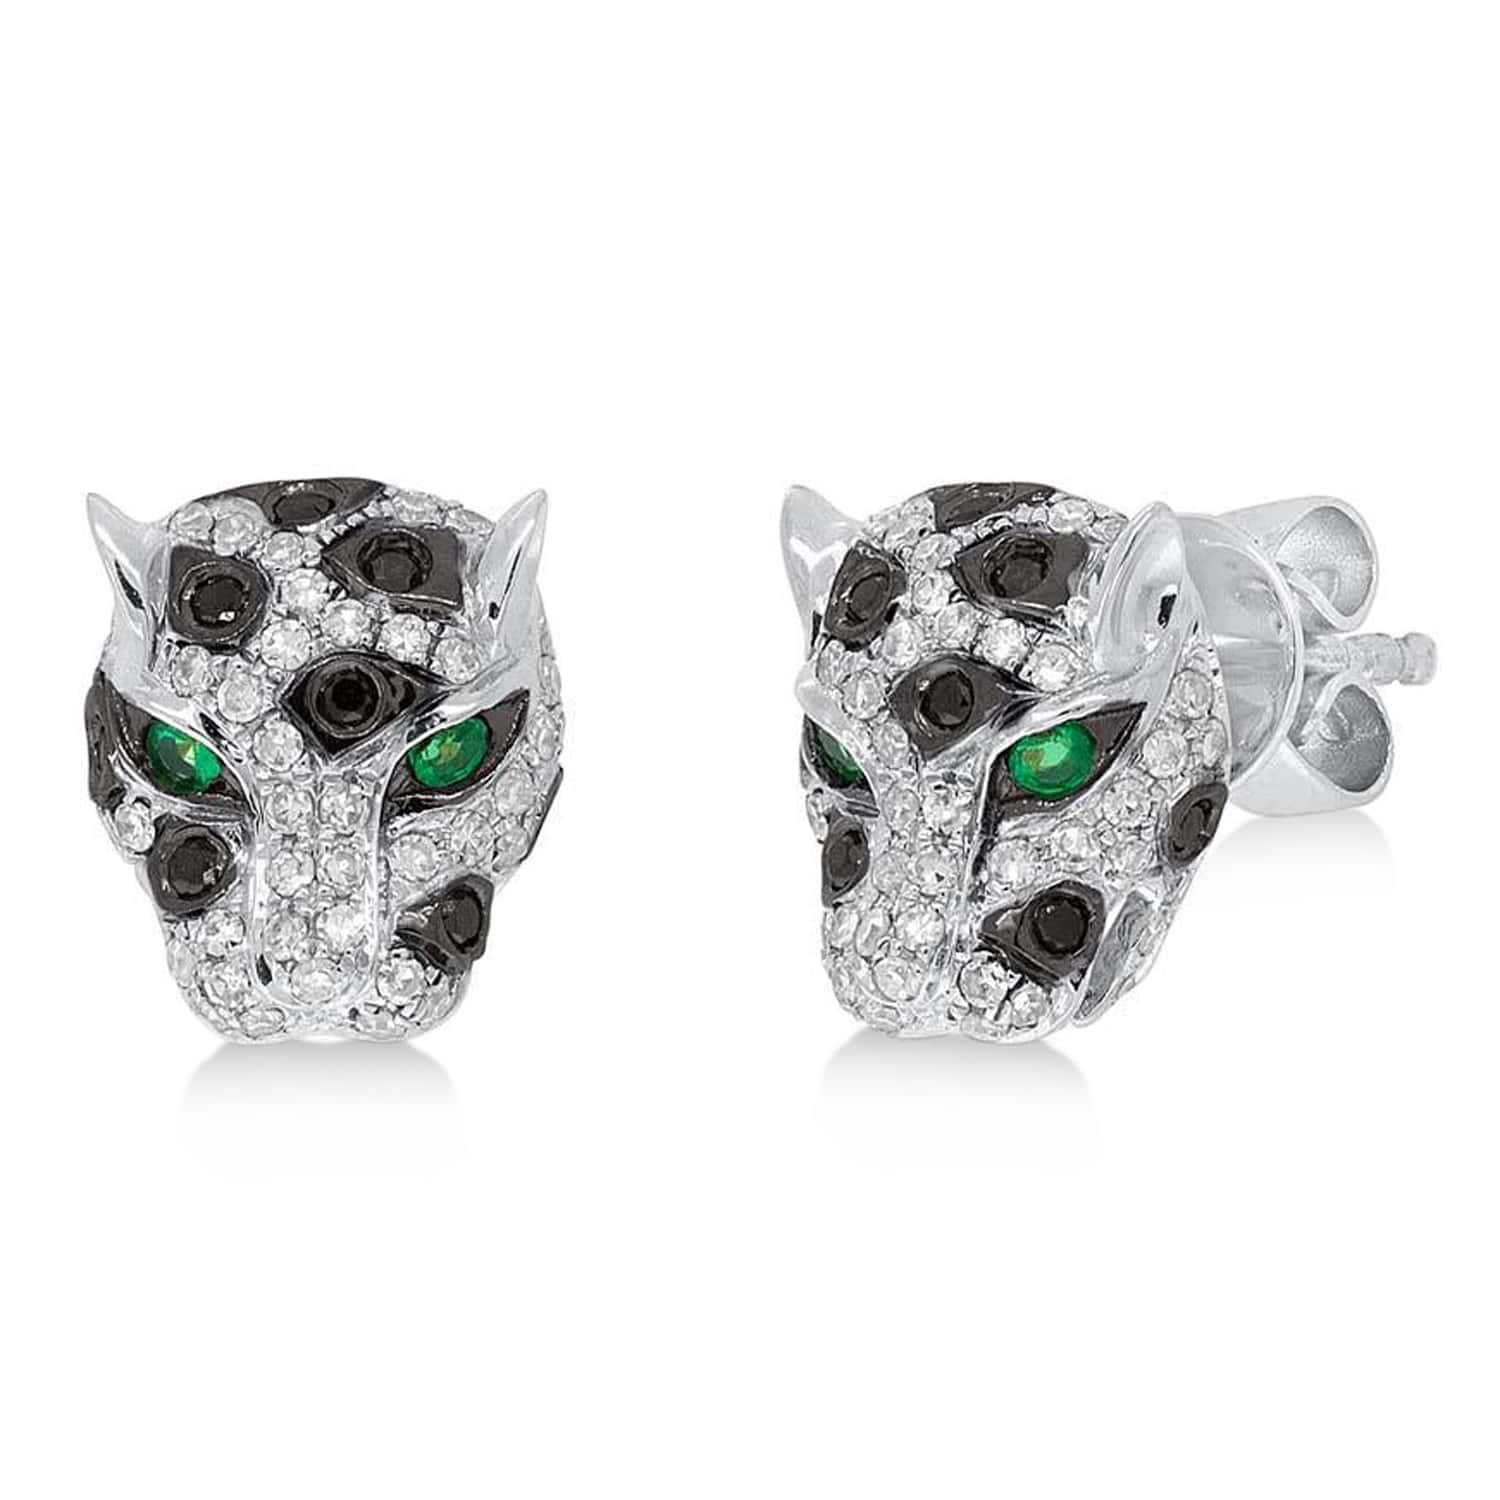 Diamond & Emerald Panther Earrings 14K White Gold (0.37ct)